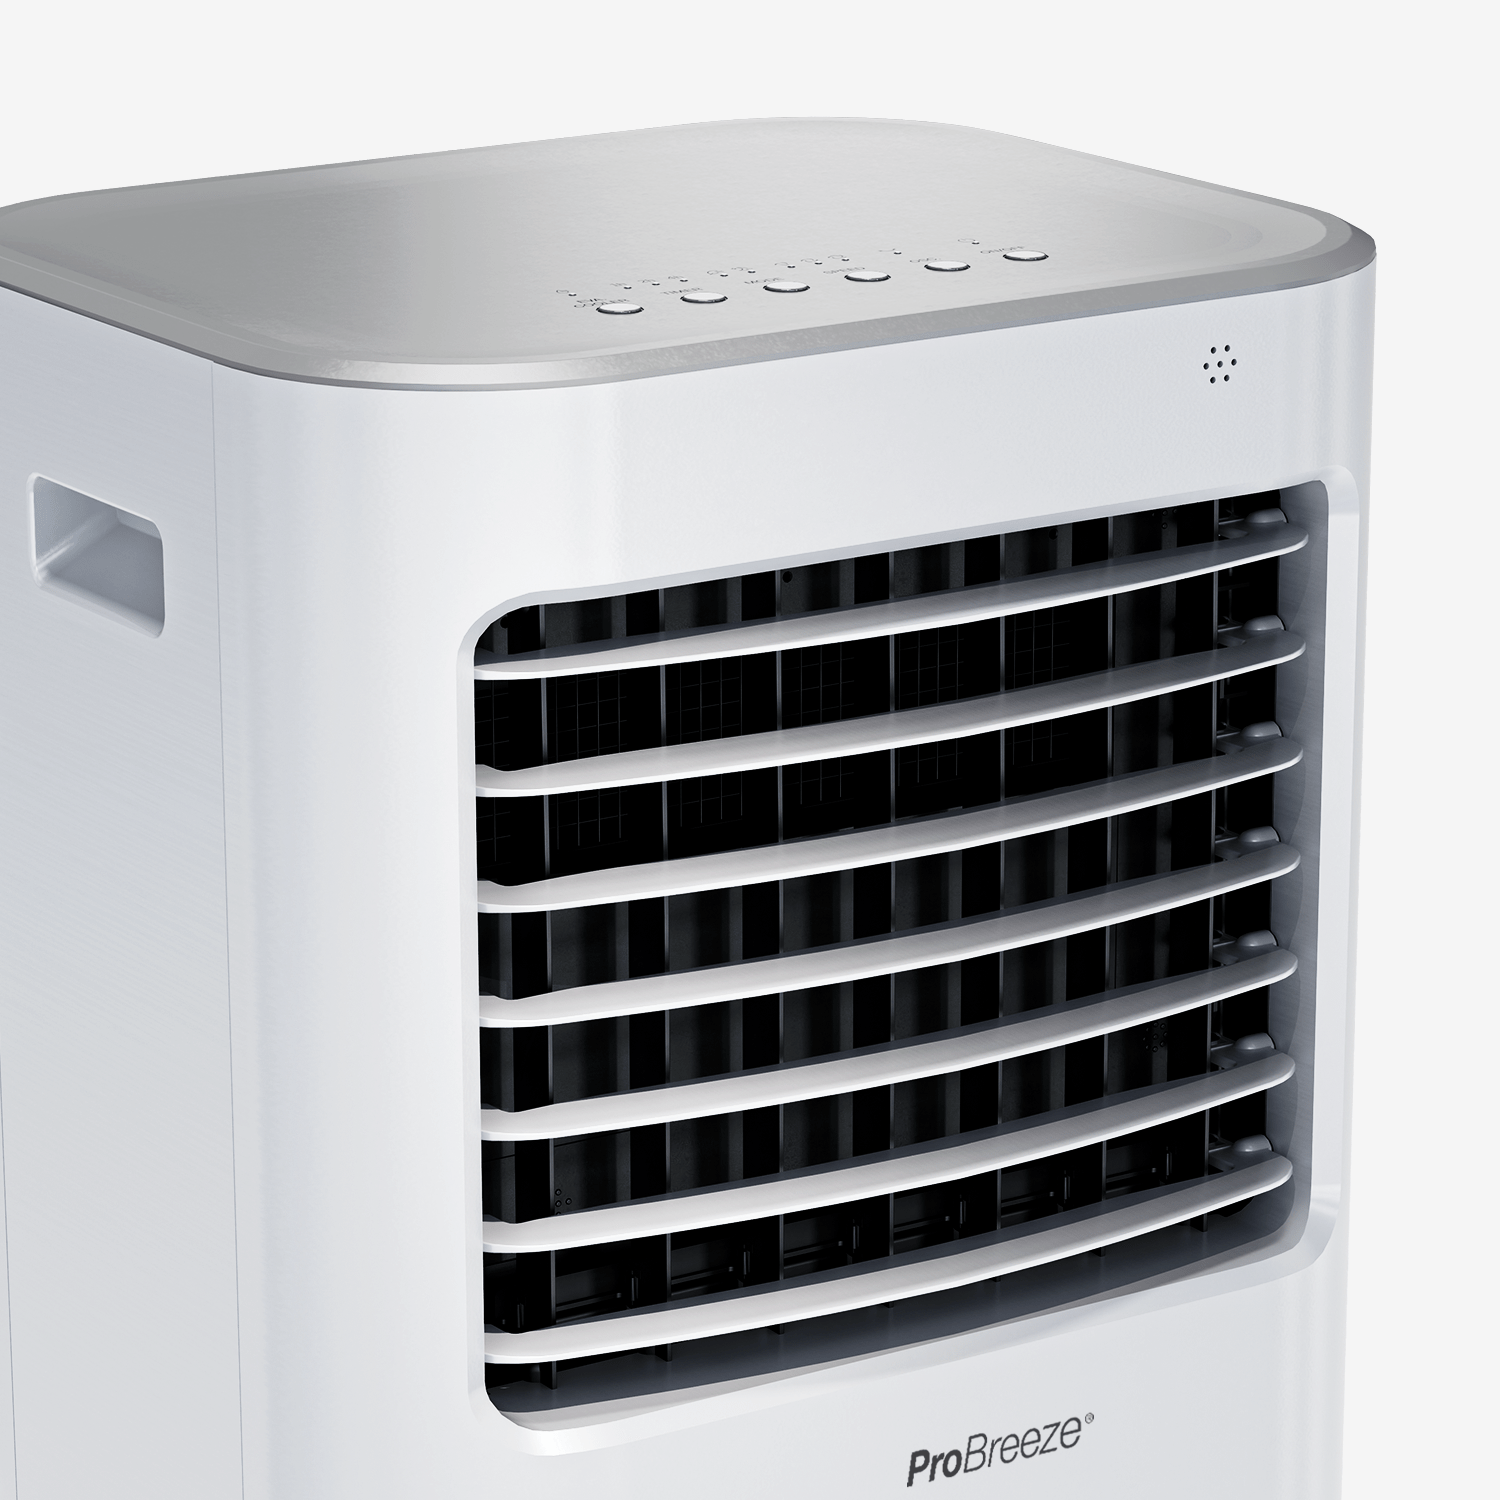 10L Portable Air Cooler with 4 Operational Modes, 3 Fan Speeds, LED Display & Remote Control